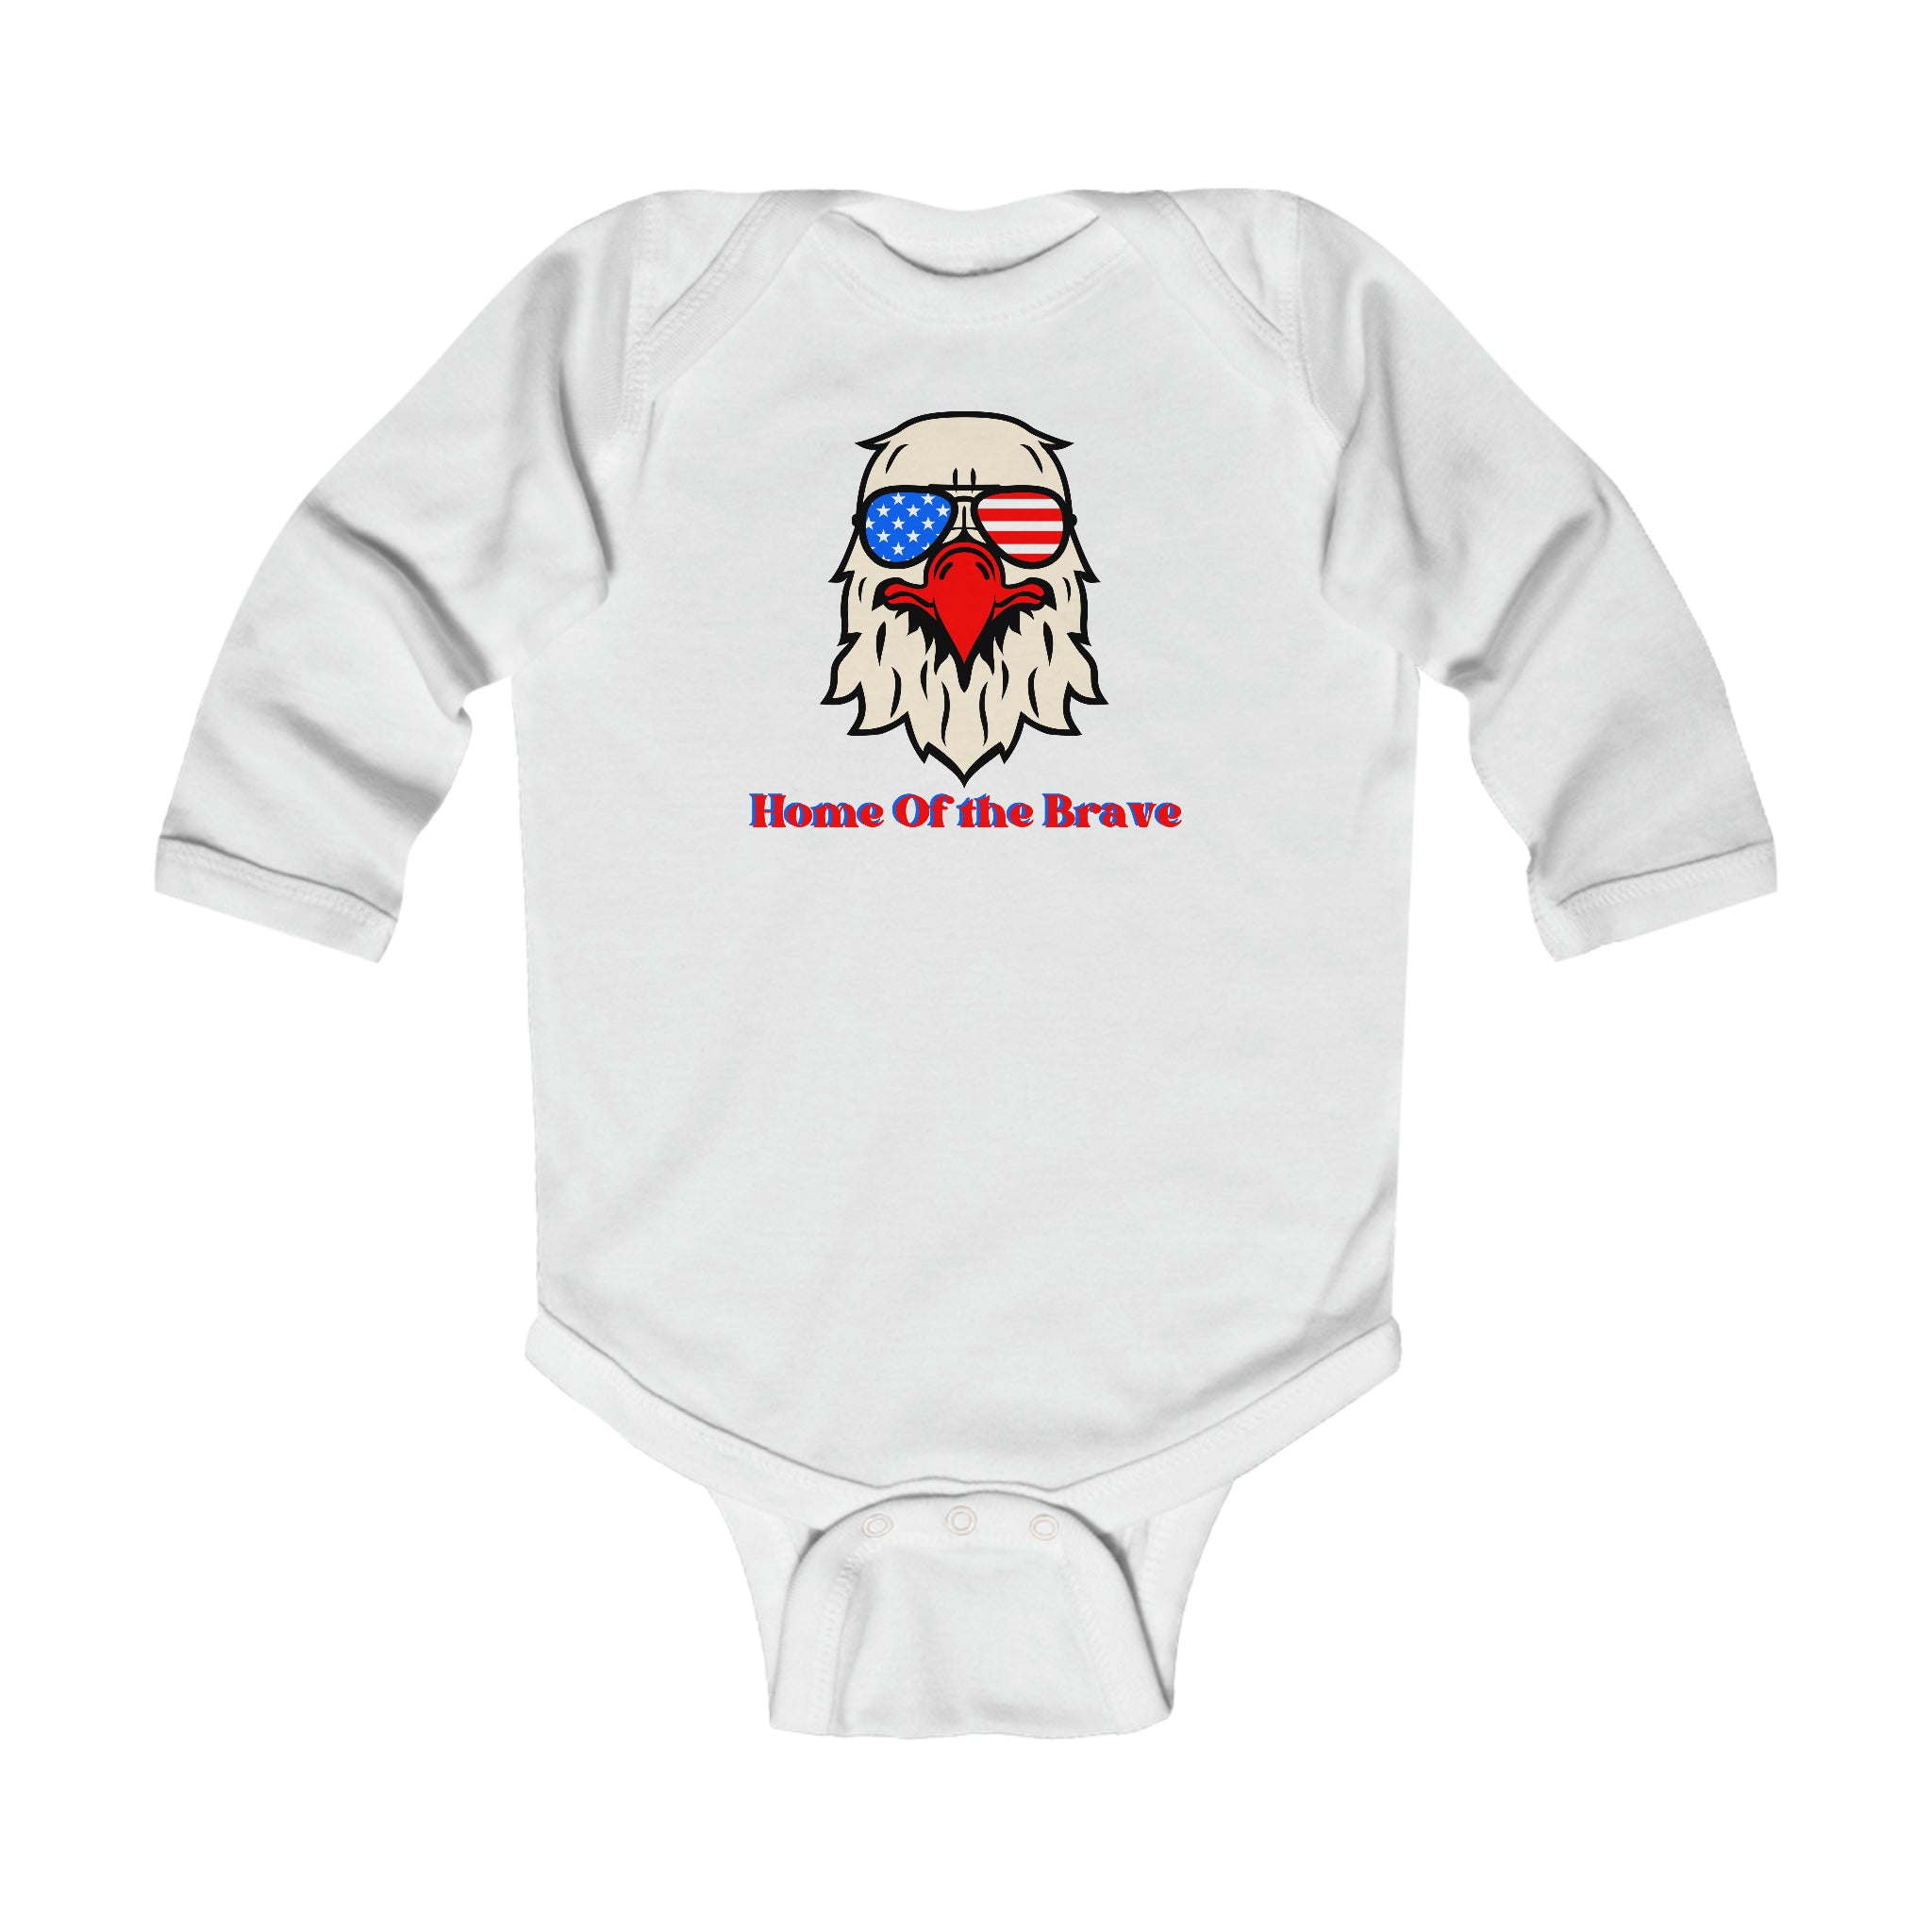 Home Of The Brave Long Sleeve Baby Bodysuit